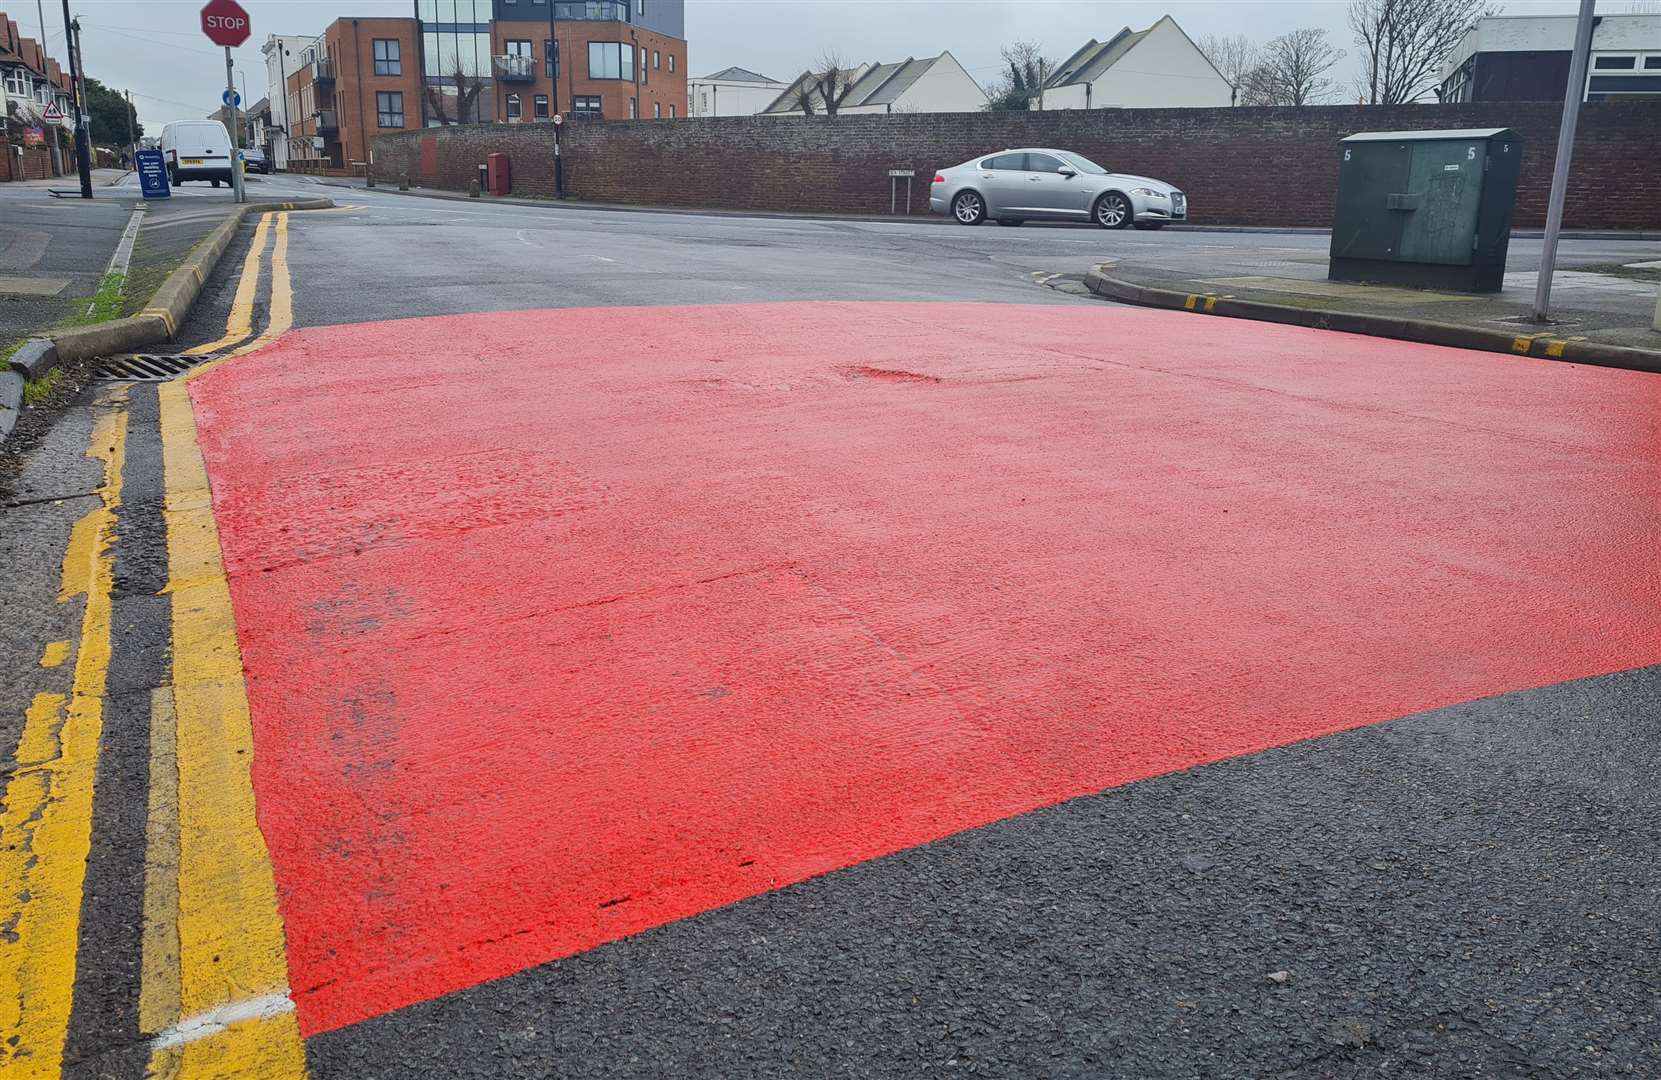 Red paint on the road marks the new 20mph zone at the junction of The Broadway and Sea Street in Herne Bay